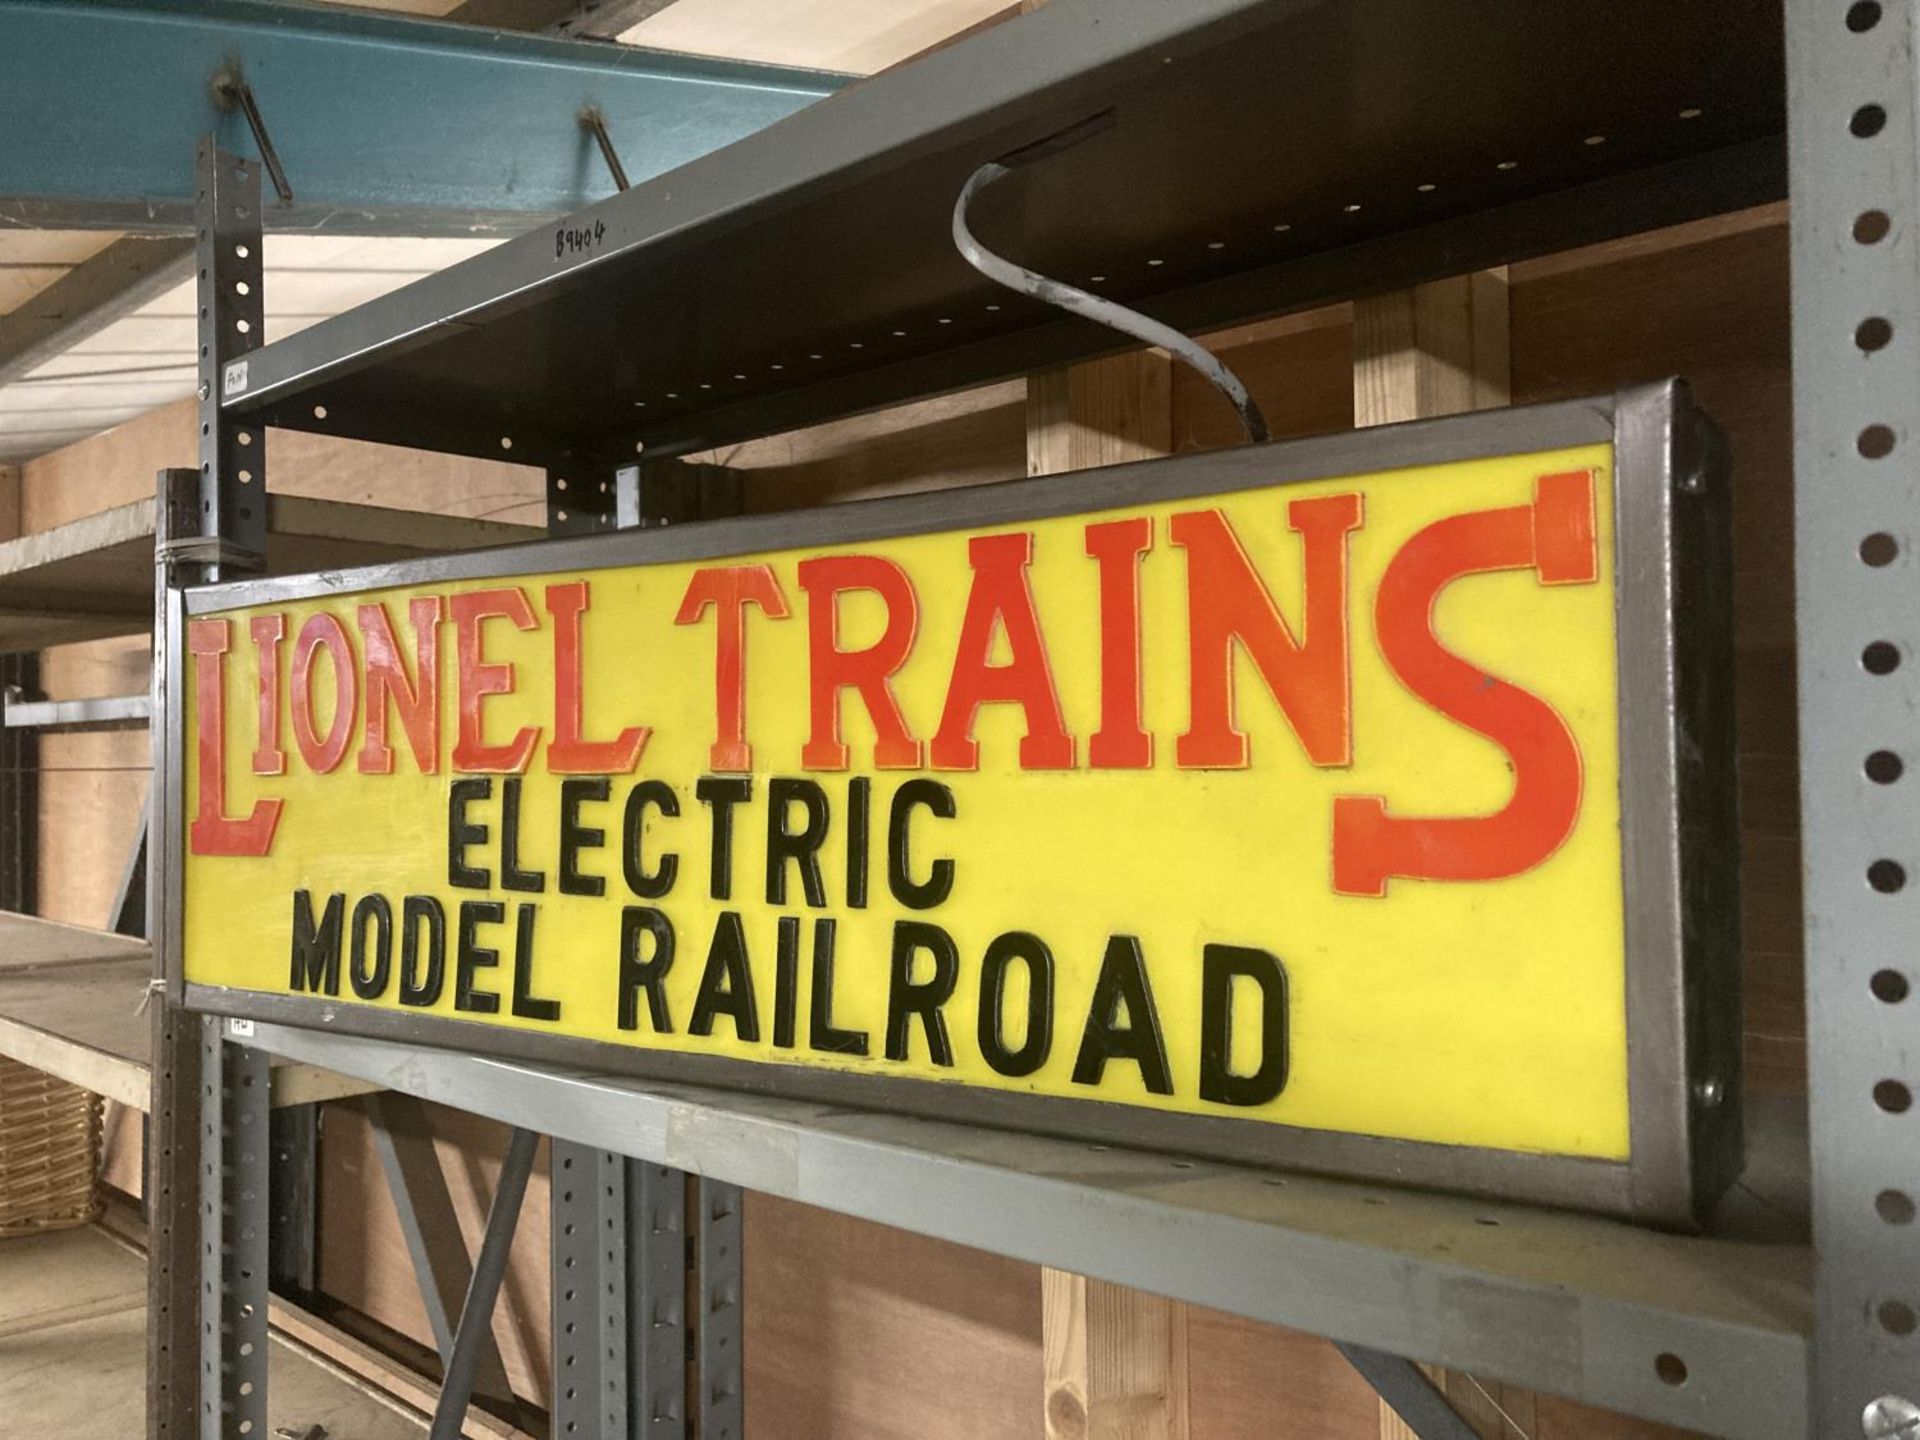 A LIONEL TRAINS ELECTRIC MODEL RAILROAD ILLUMINATED LIGHTBOX SIGN - Image 3 of 4